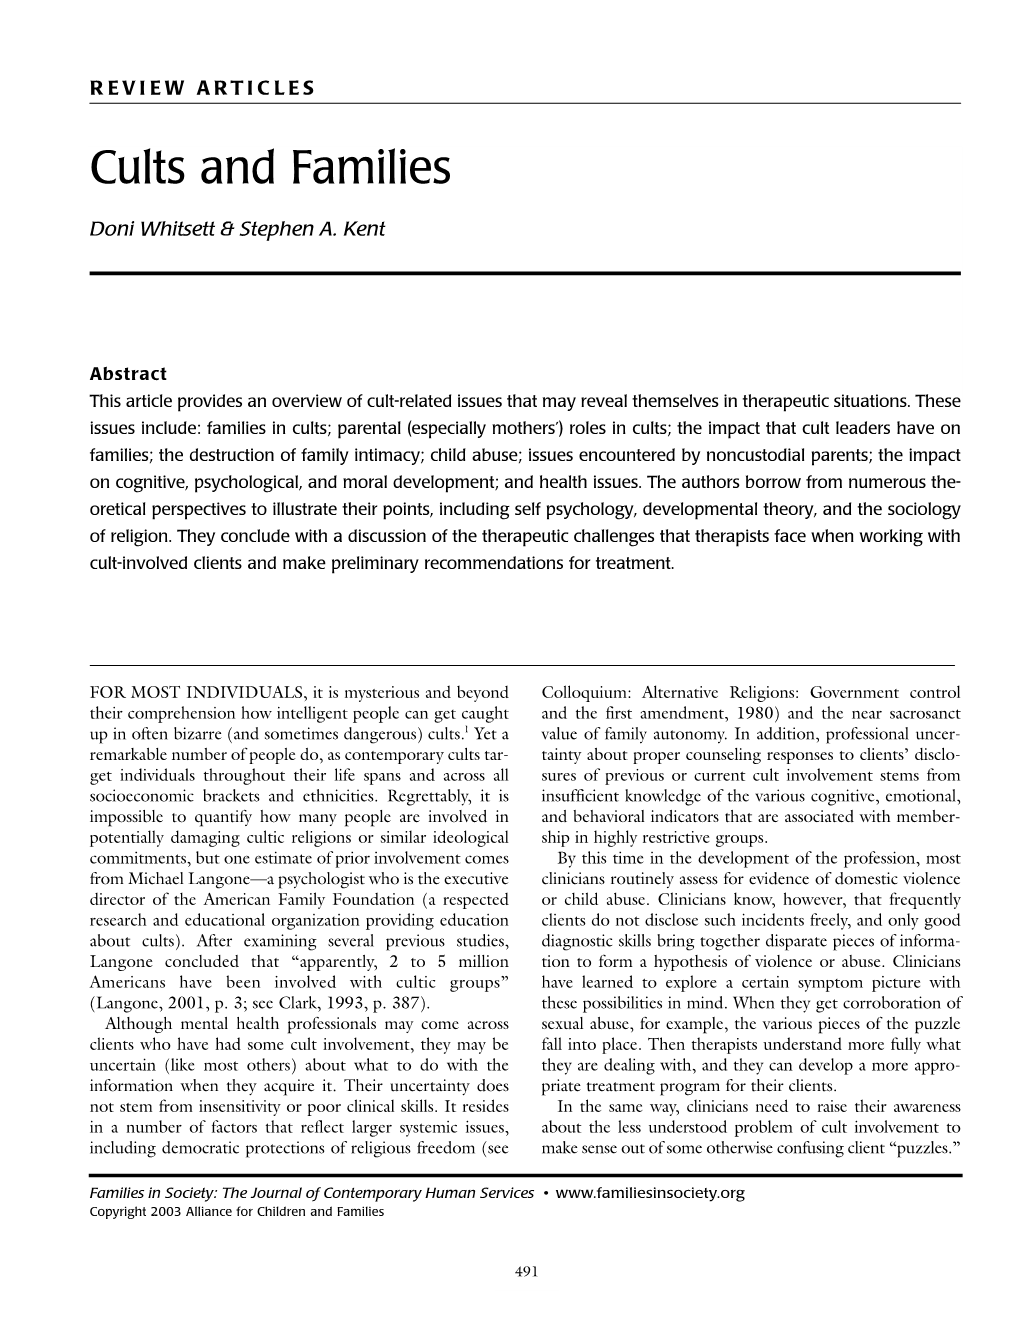 Cults and Families